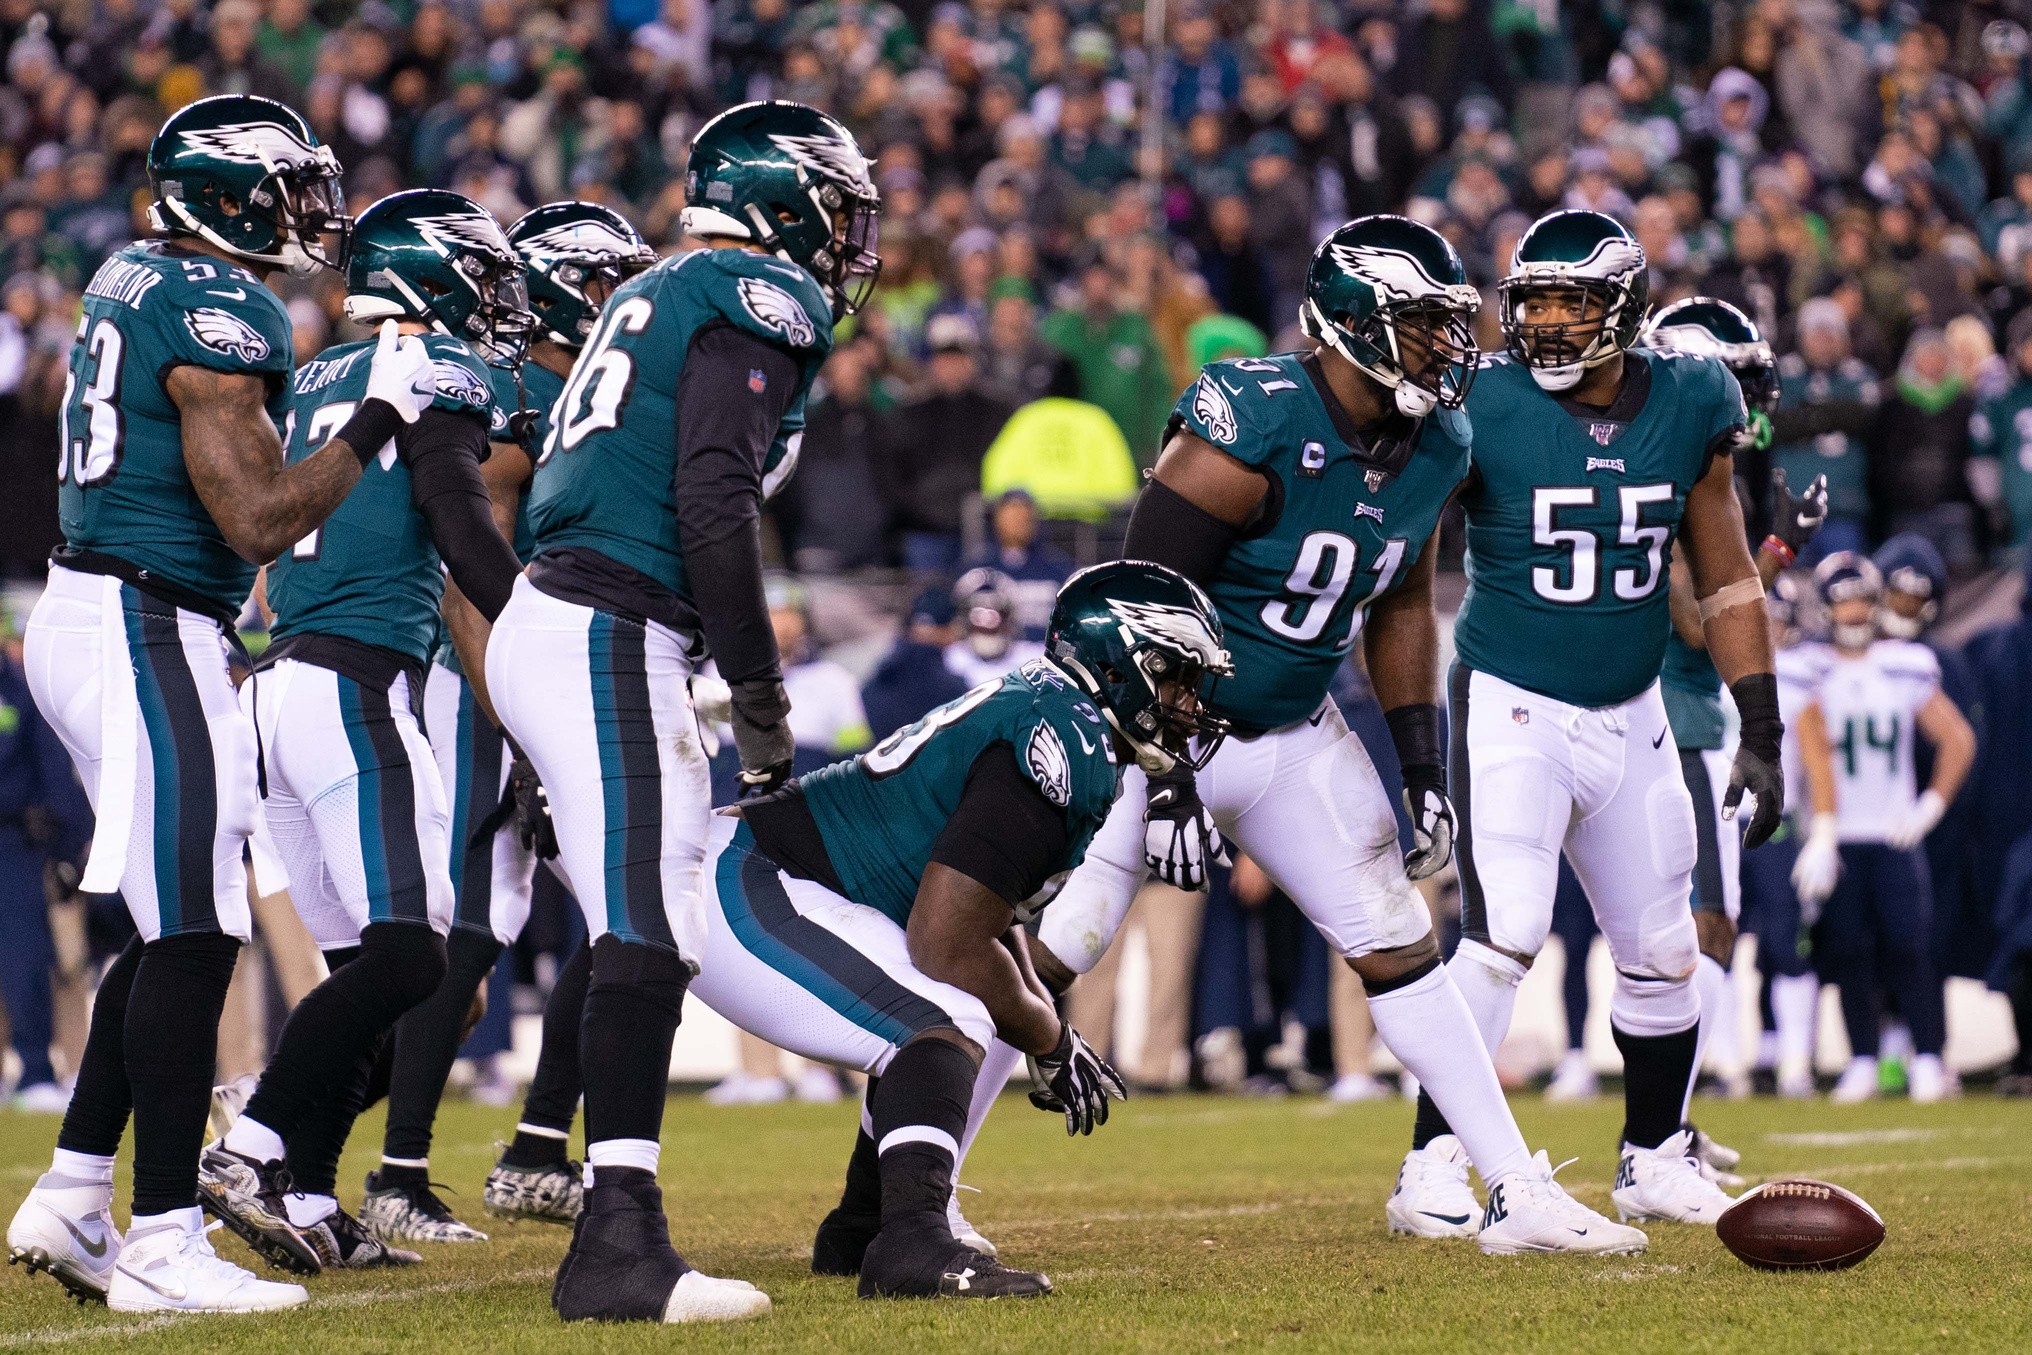 Eagles defensive line may be back to its best heading into 2020 season